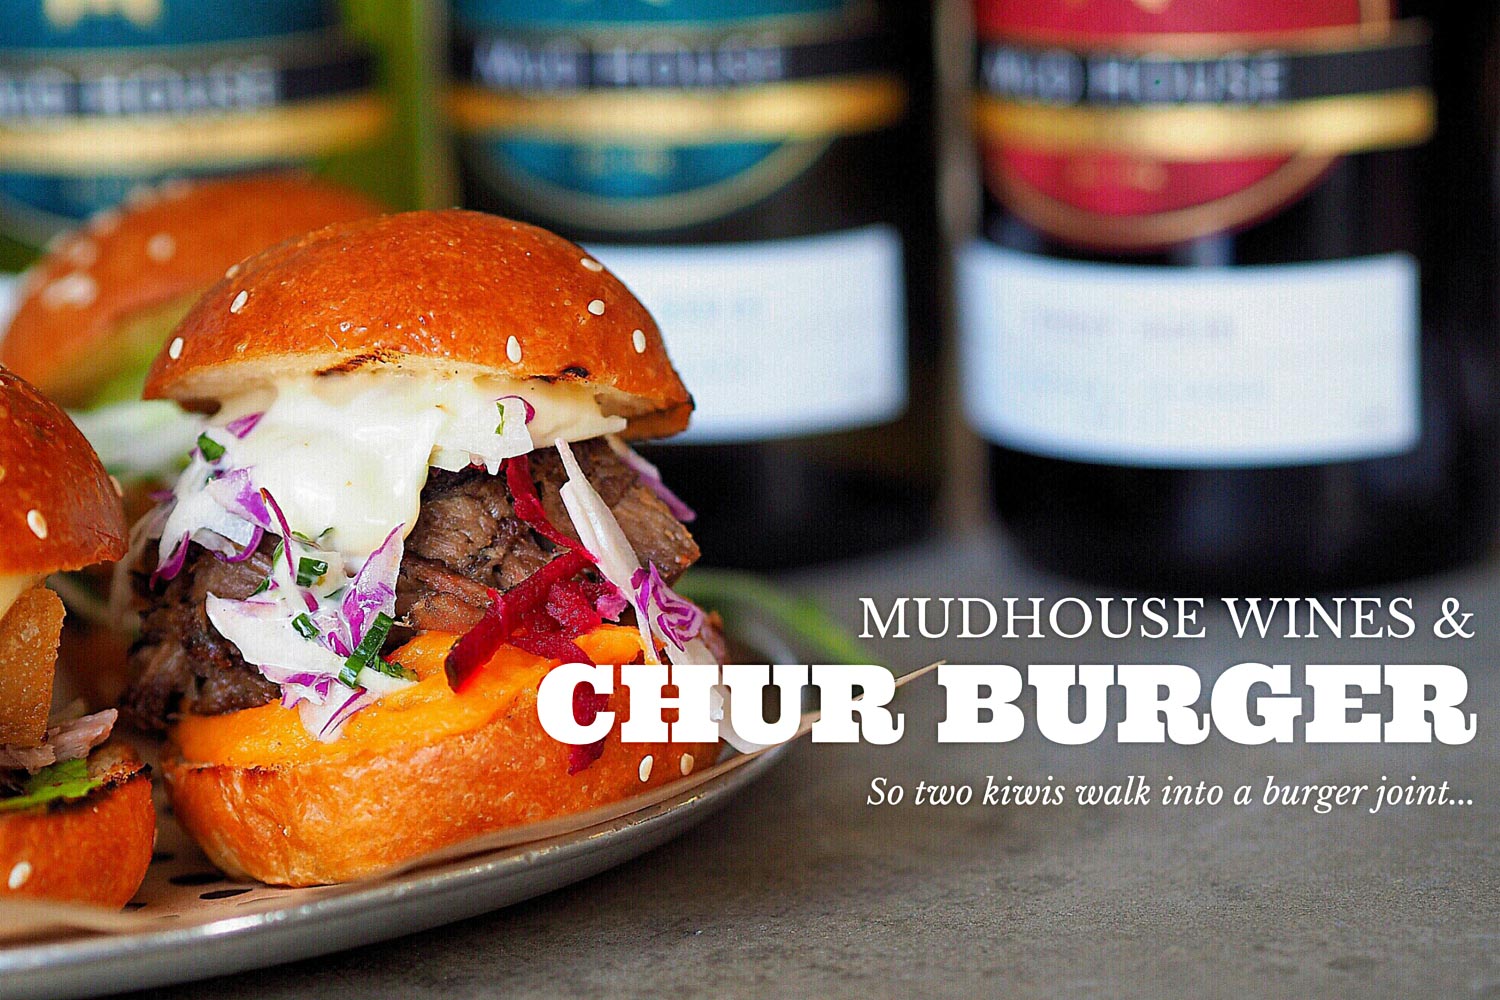 Review of Chur Burger and Mudhouse Wines